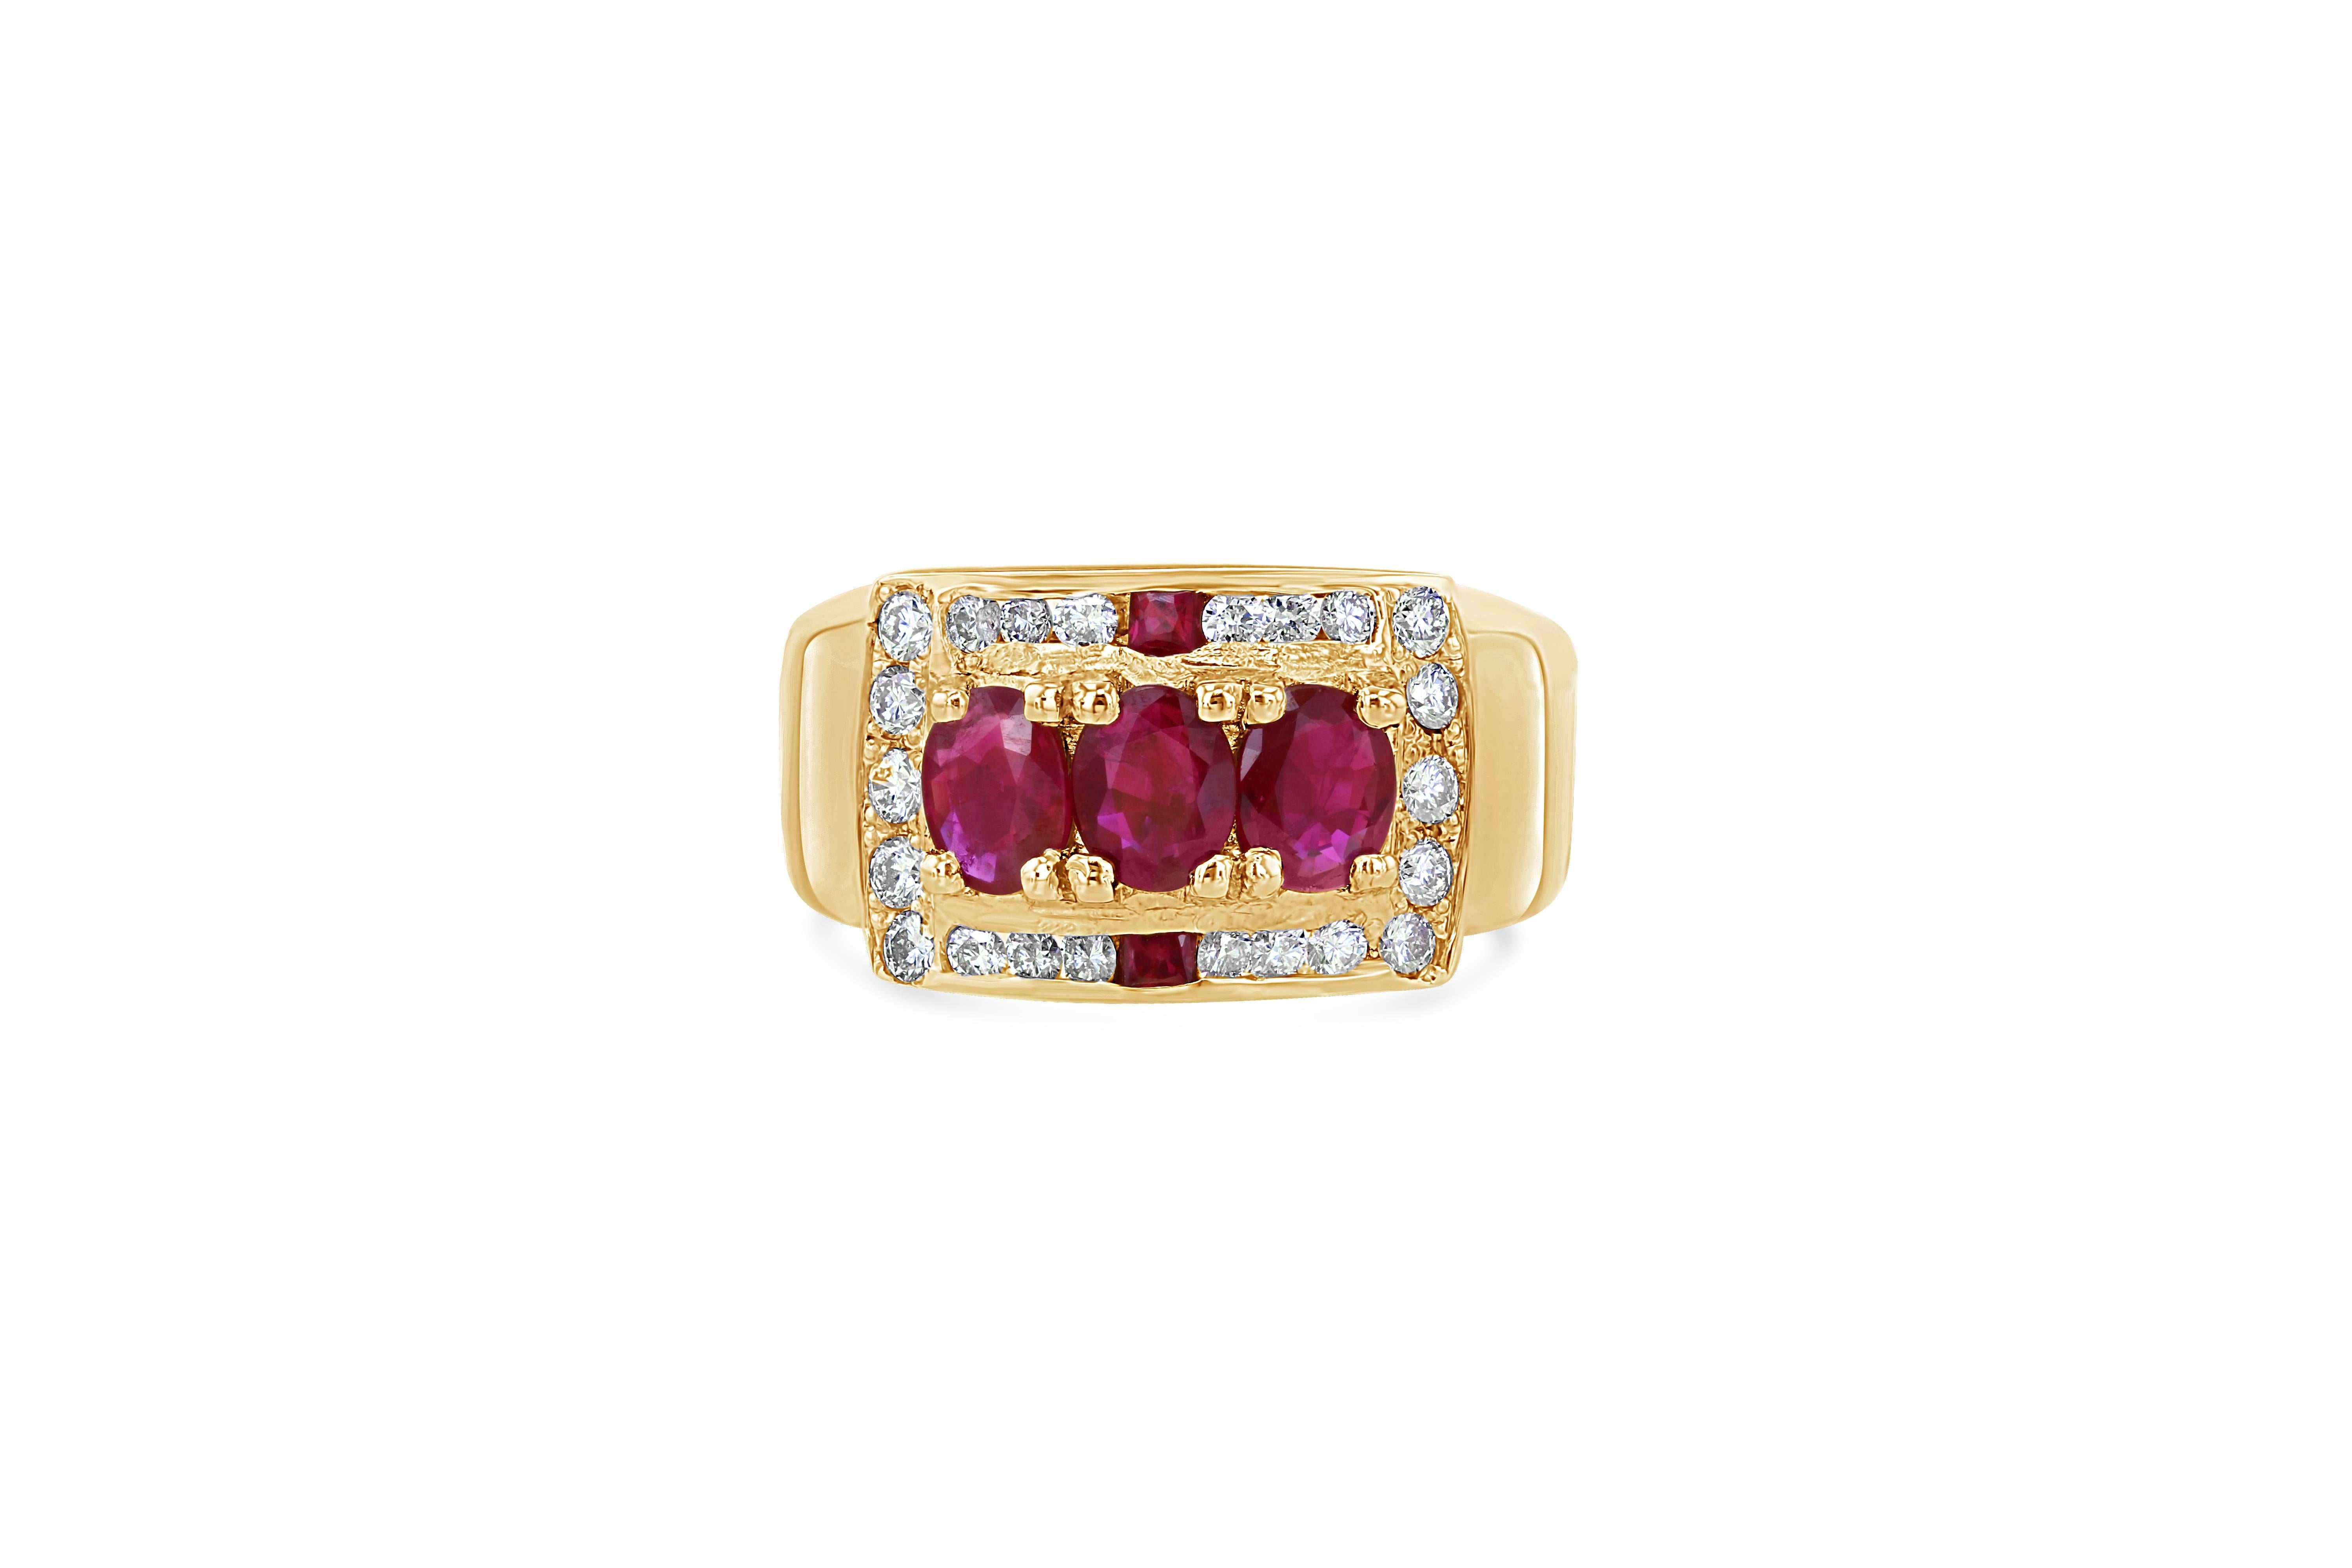 This unique unisex Ruby and Diamond Ring can be worn by both a male or female! It has 5 Rubies weighing 1.20 Carats and 22 Round Cut Diamonds weighing 0.44 Carats. The Rubies have their origin from Burma (Myanmar). It is set in 14K Yellow Gold and